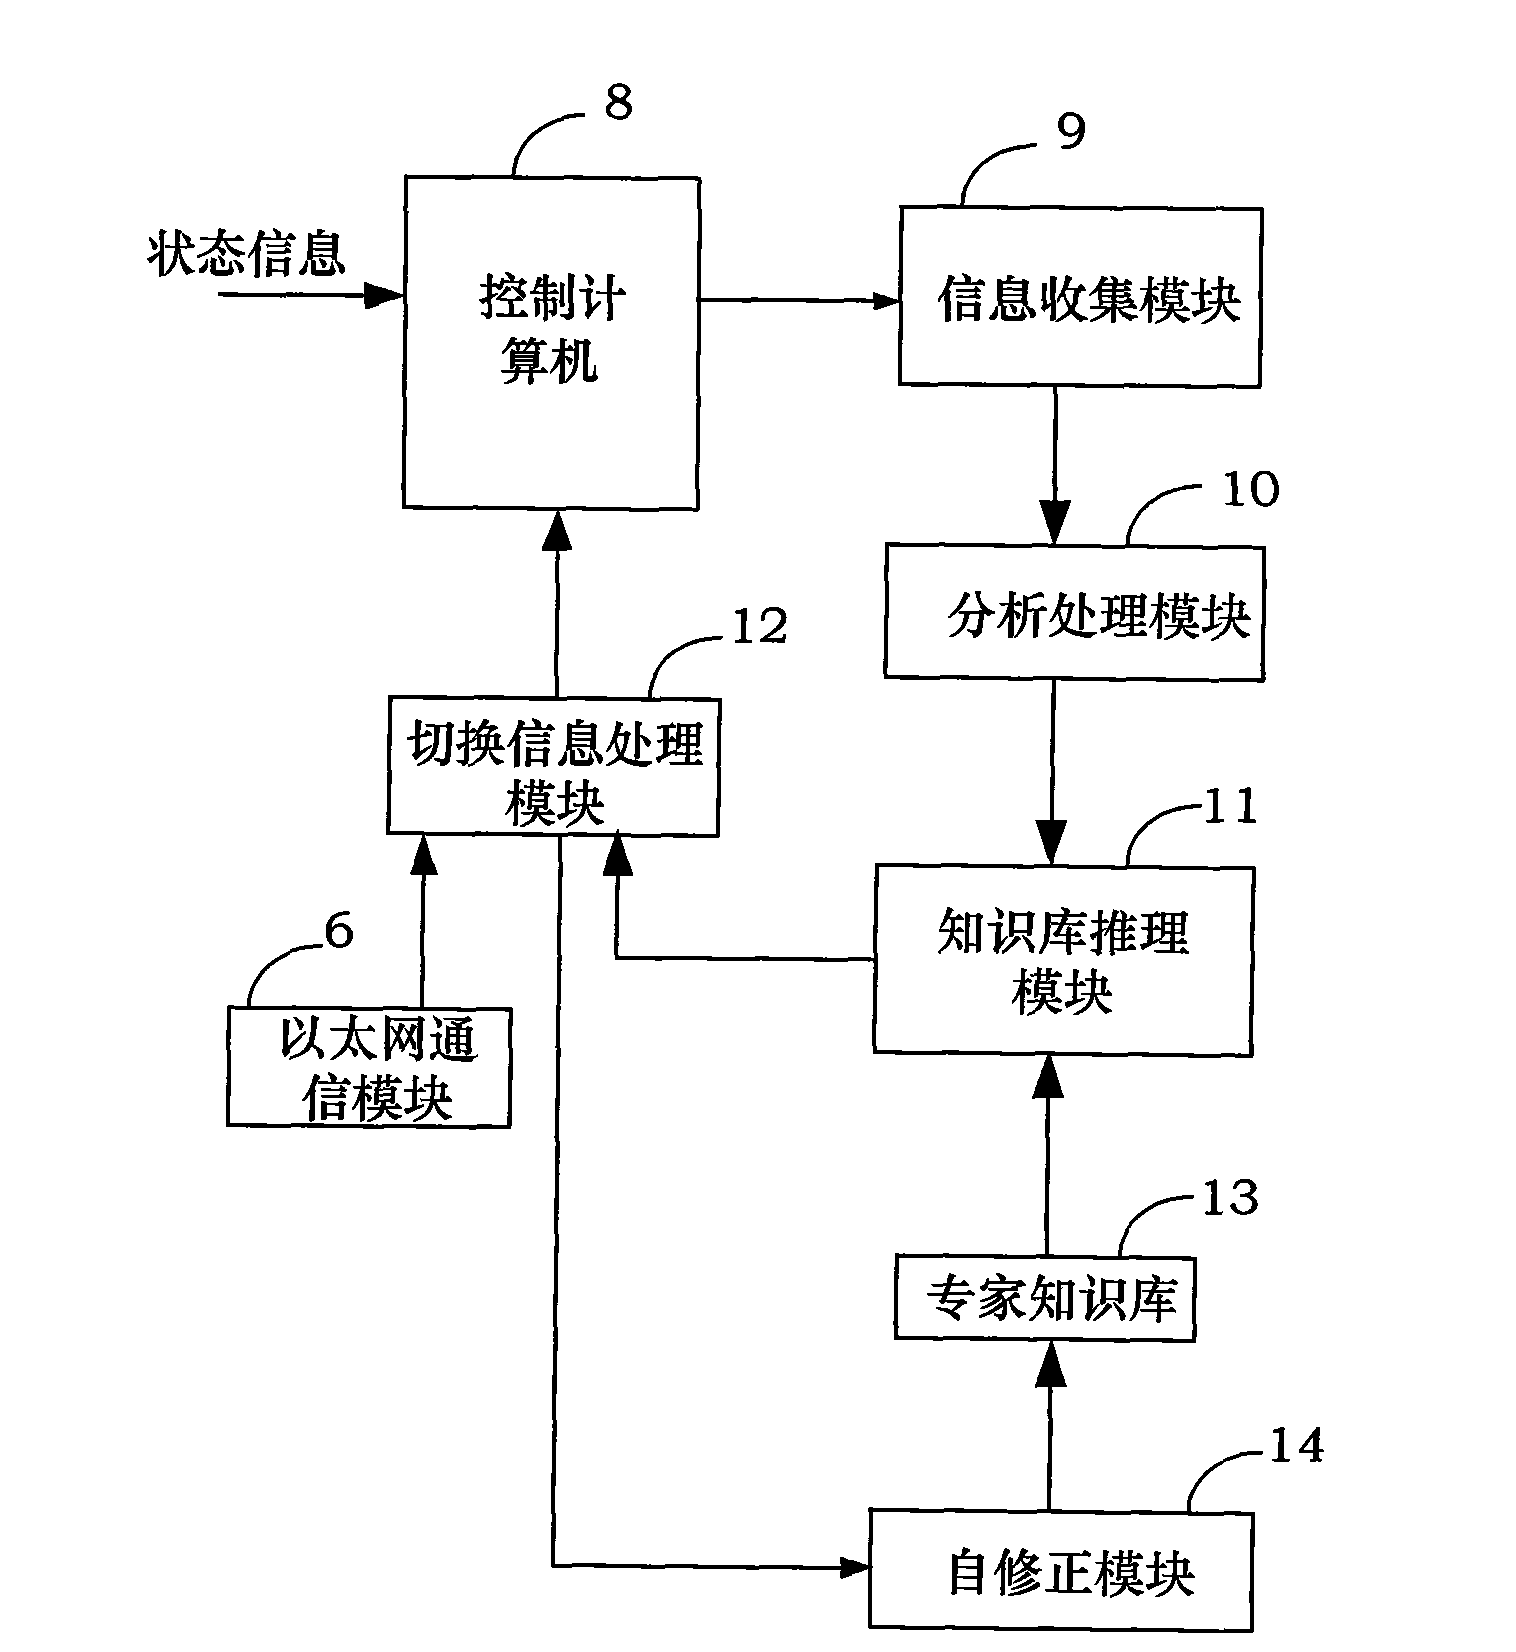 Self-correcting redundancy switching mechanism for spacecraft system and verification method thereof